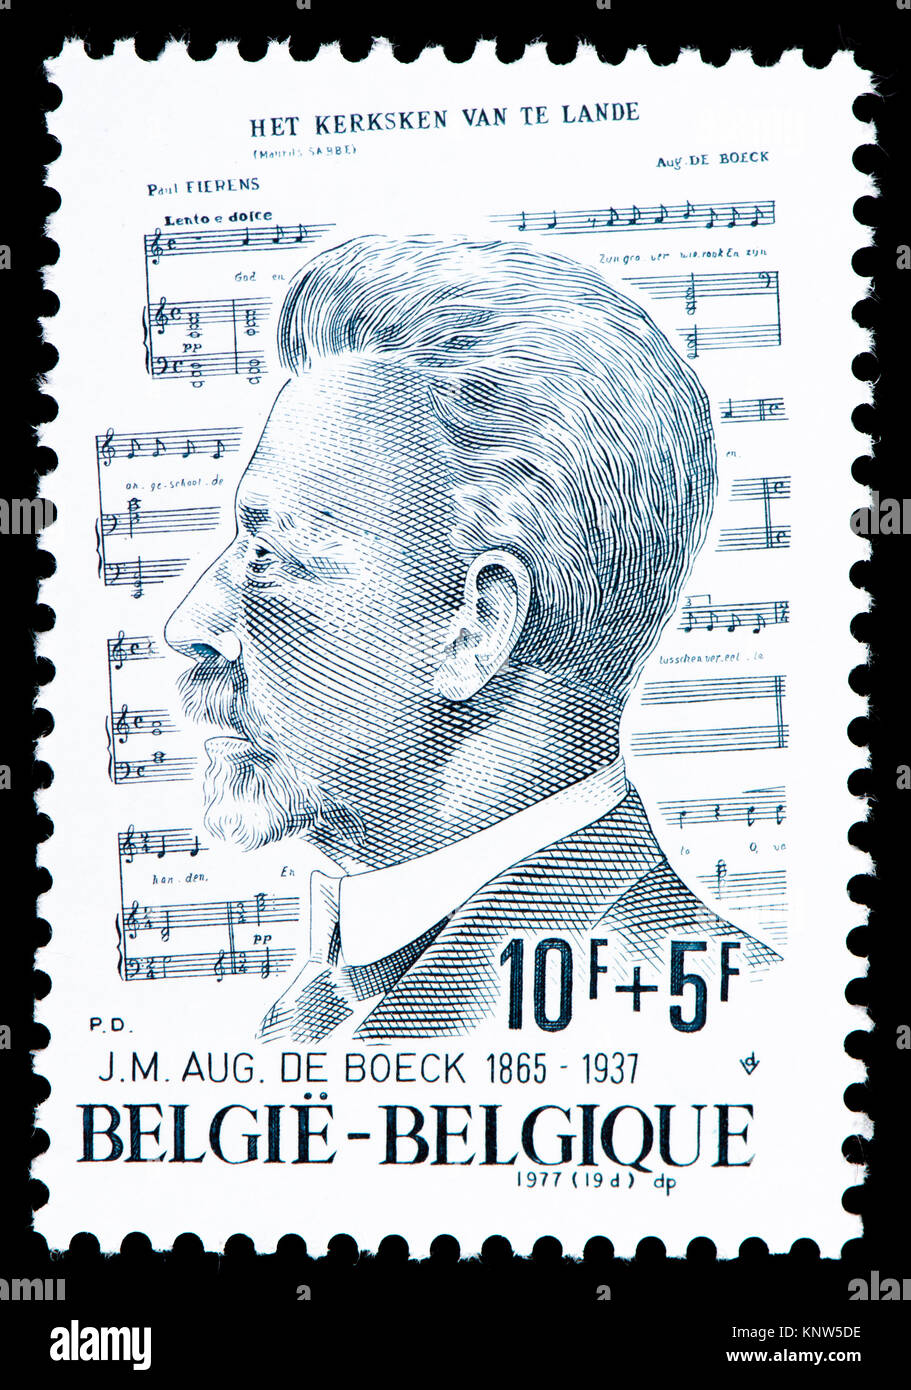 Belgian postage stamp (1977) : 50th anniversary of the death of Julianus Marie August De Boeck (1865 - 1937) Flemish composer and organist. Music.... Stock Photo